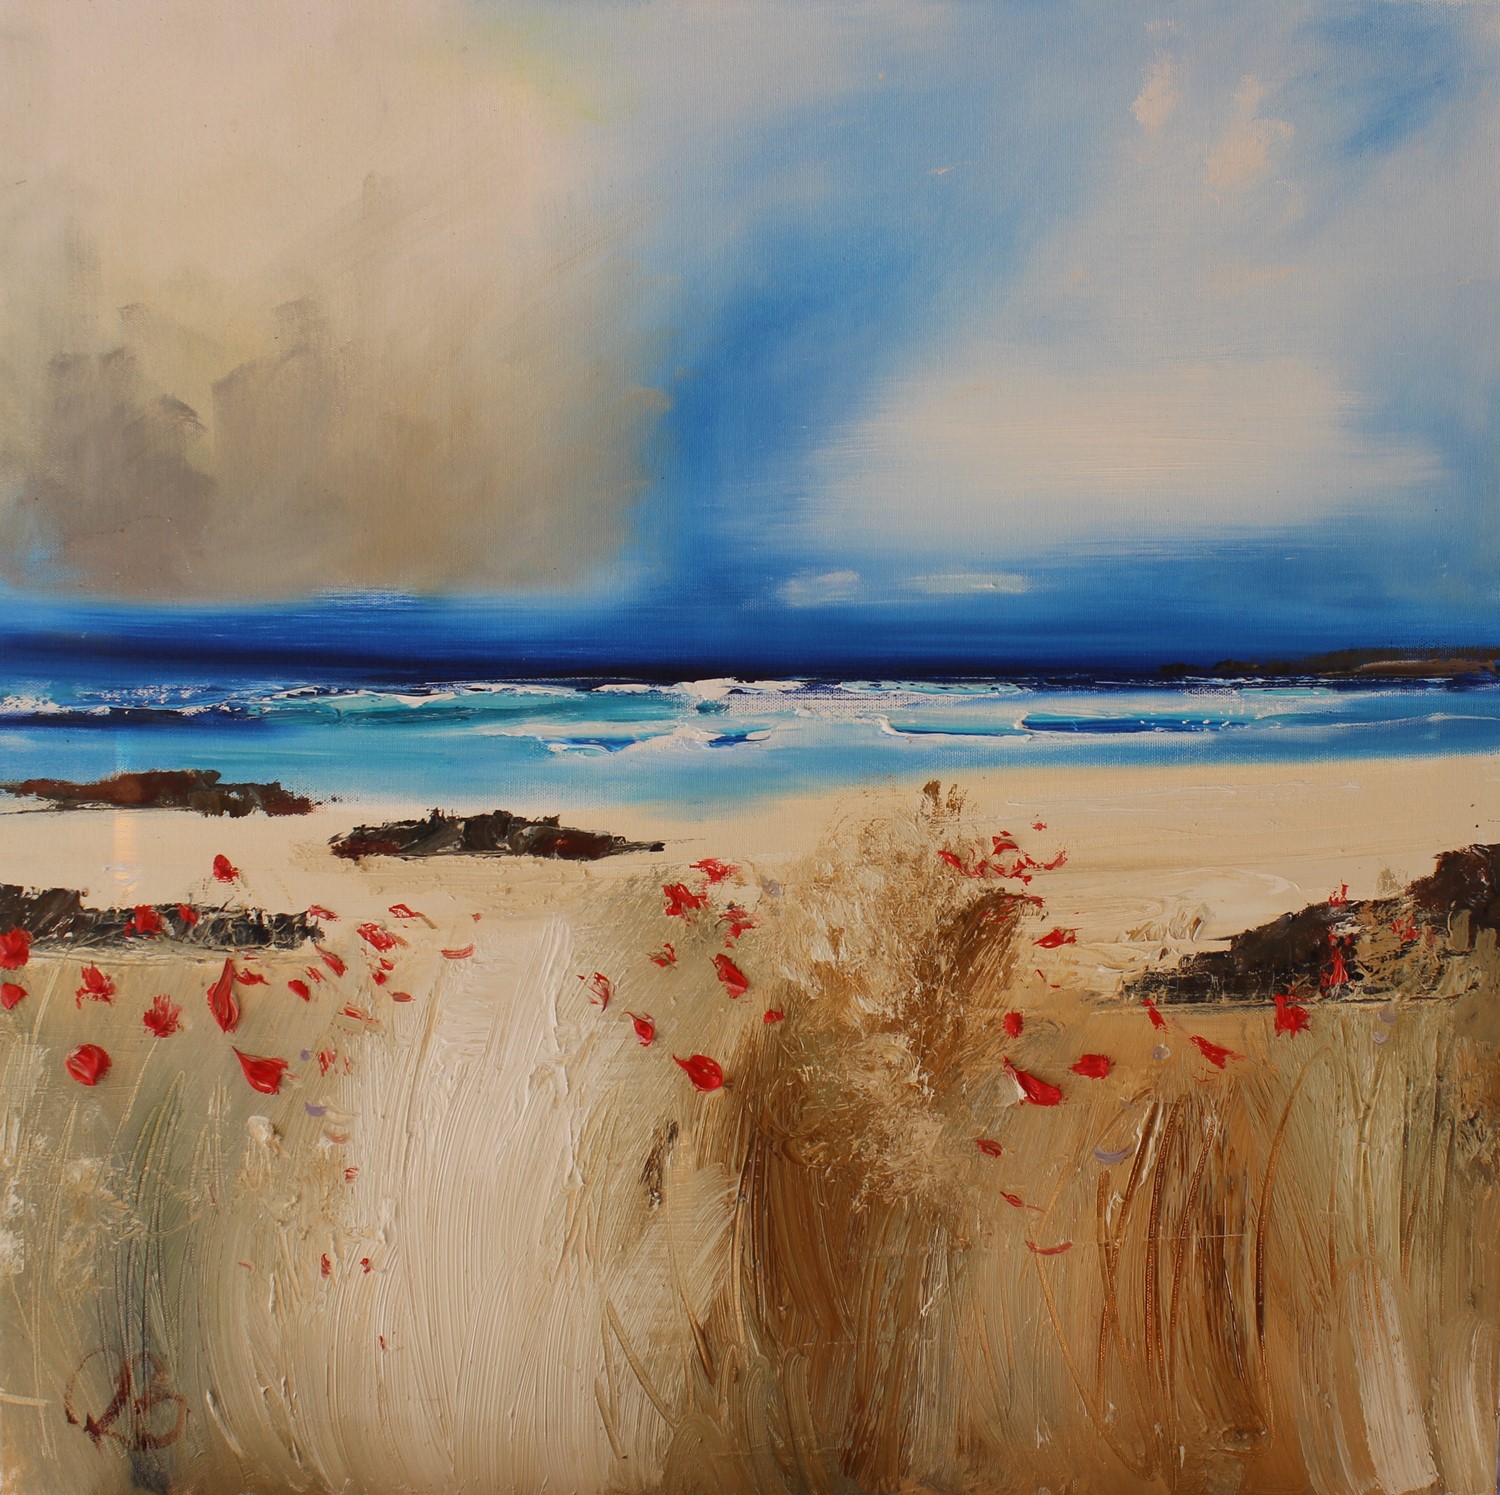 'Scattered Poppies by the Beach' by artist Rosanne Barr